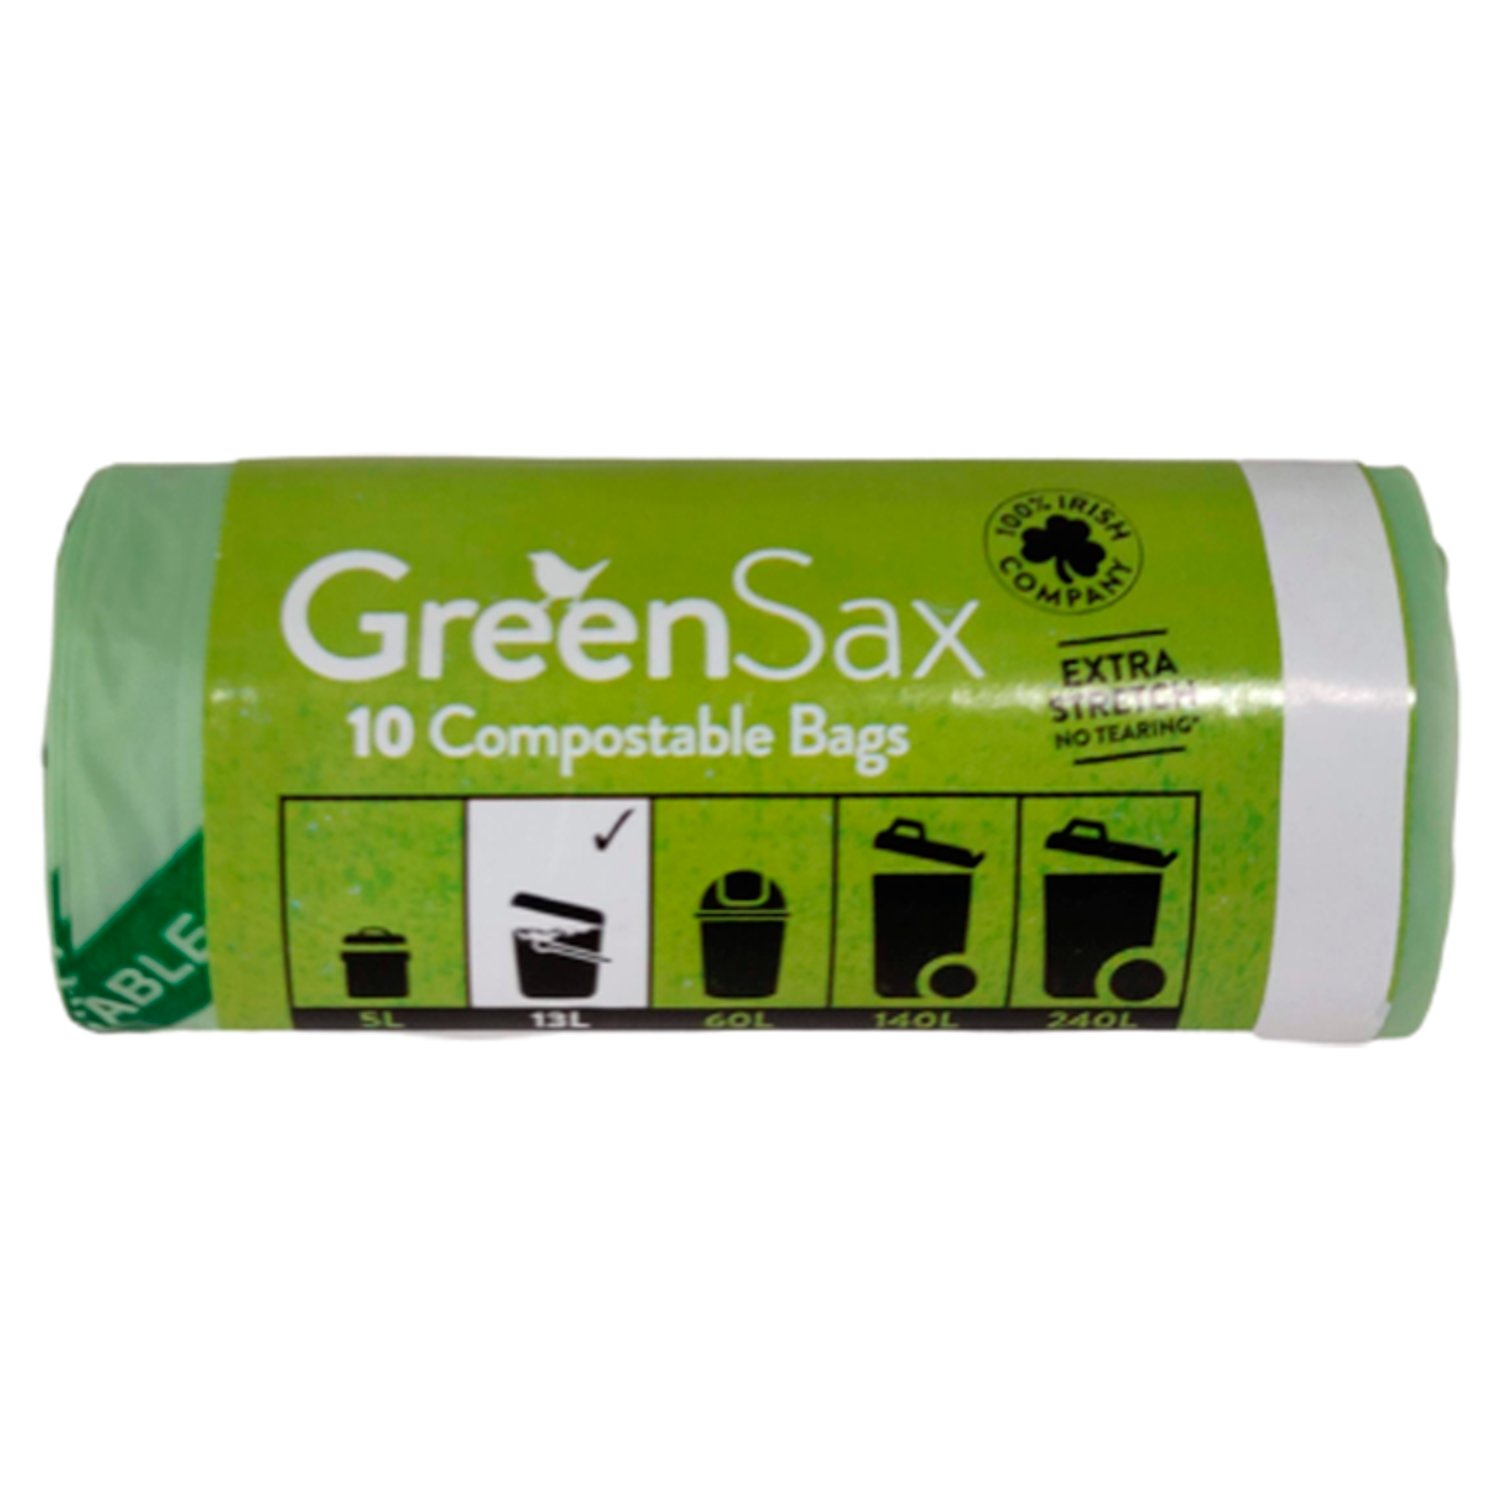 Greensax 13l Compostable Bags (10 Piece)